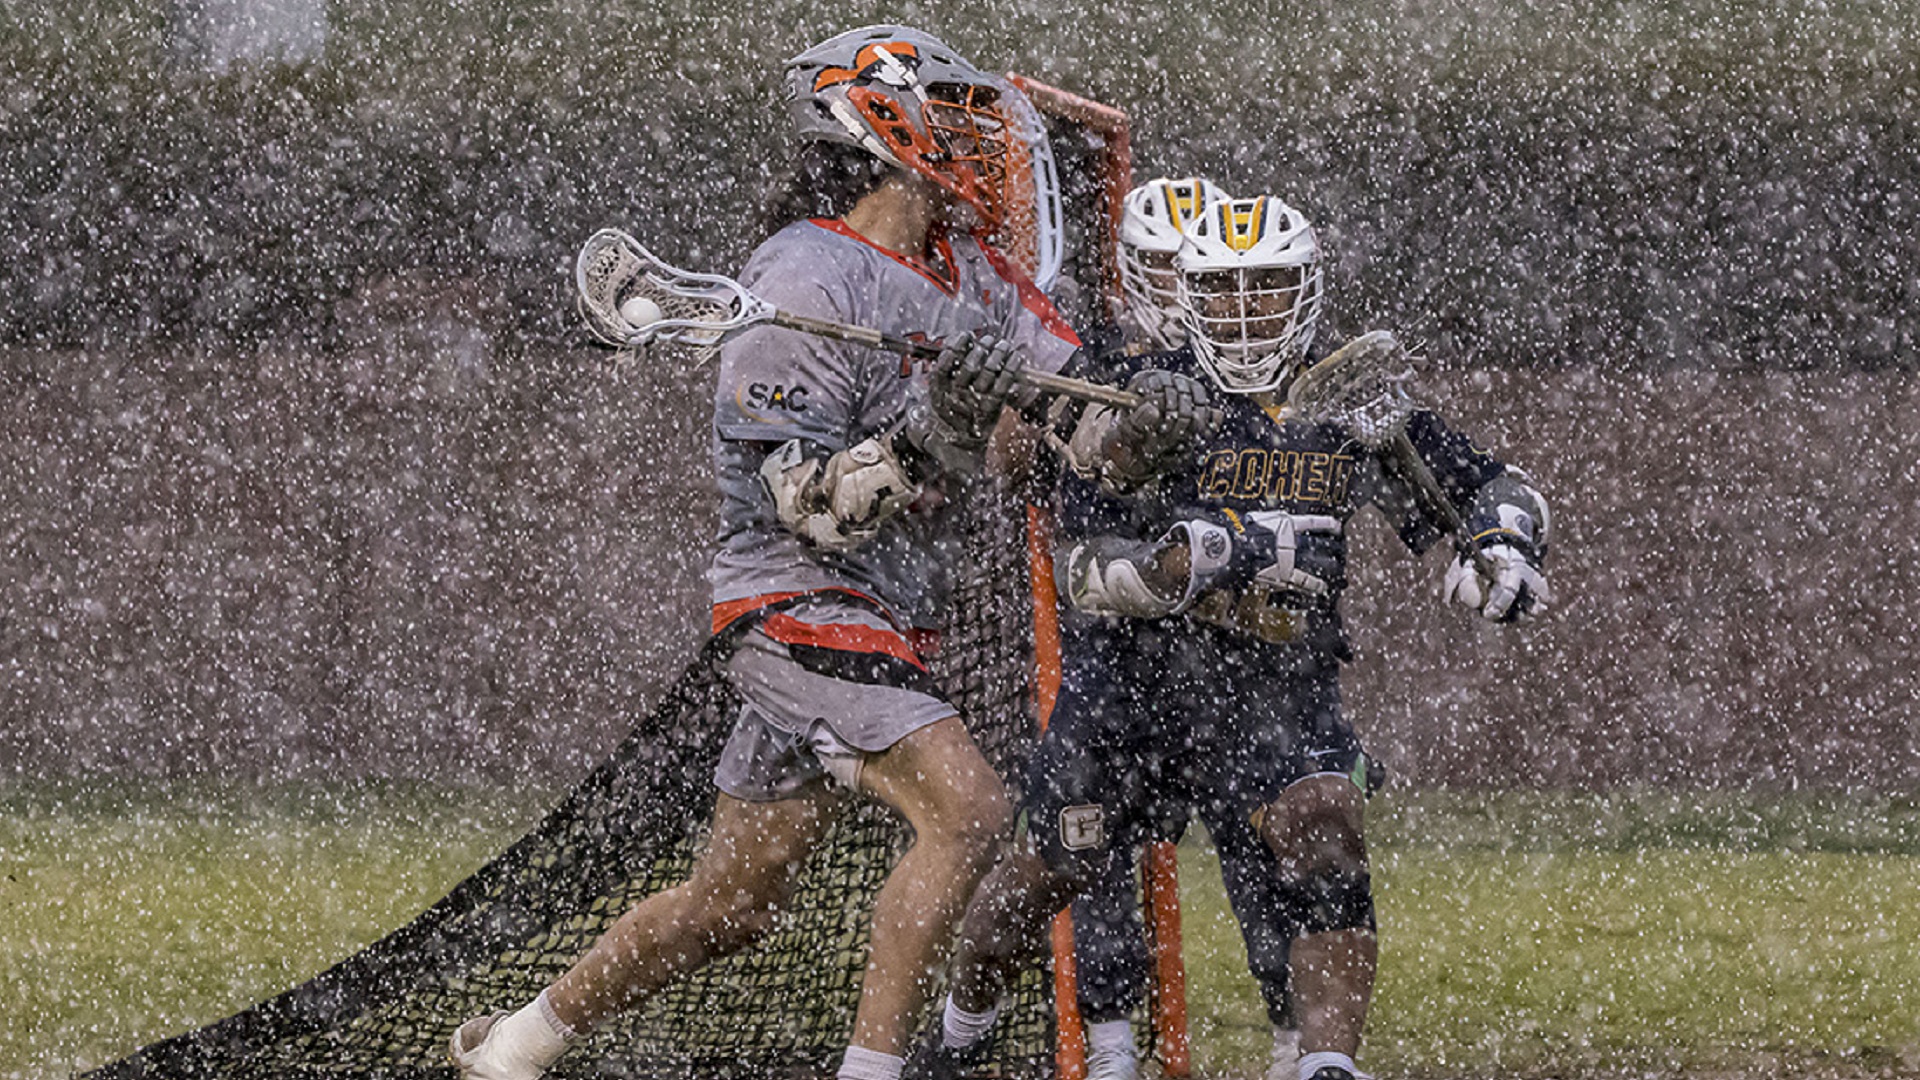 Sean Dunn battled Coker and a snow squall during second-quarter action (photo by Chuck Williams)